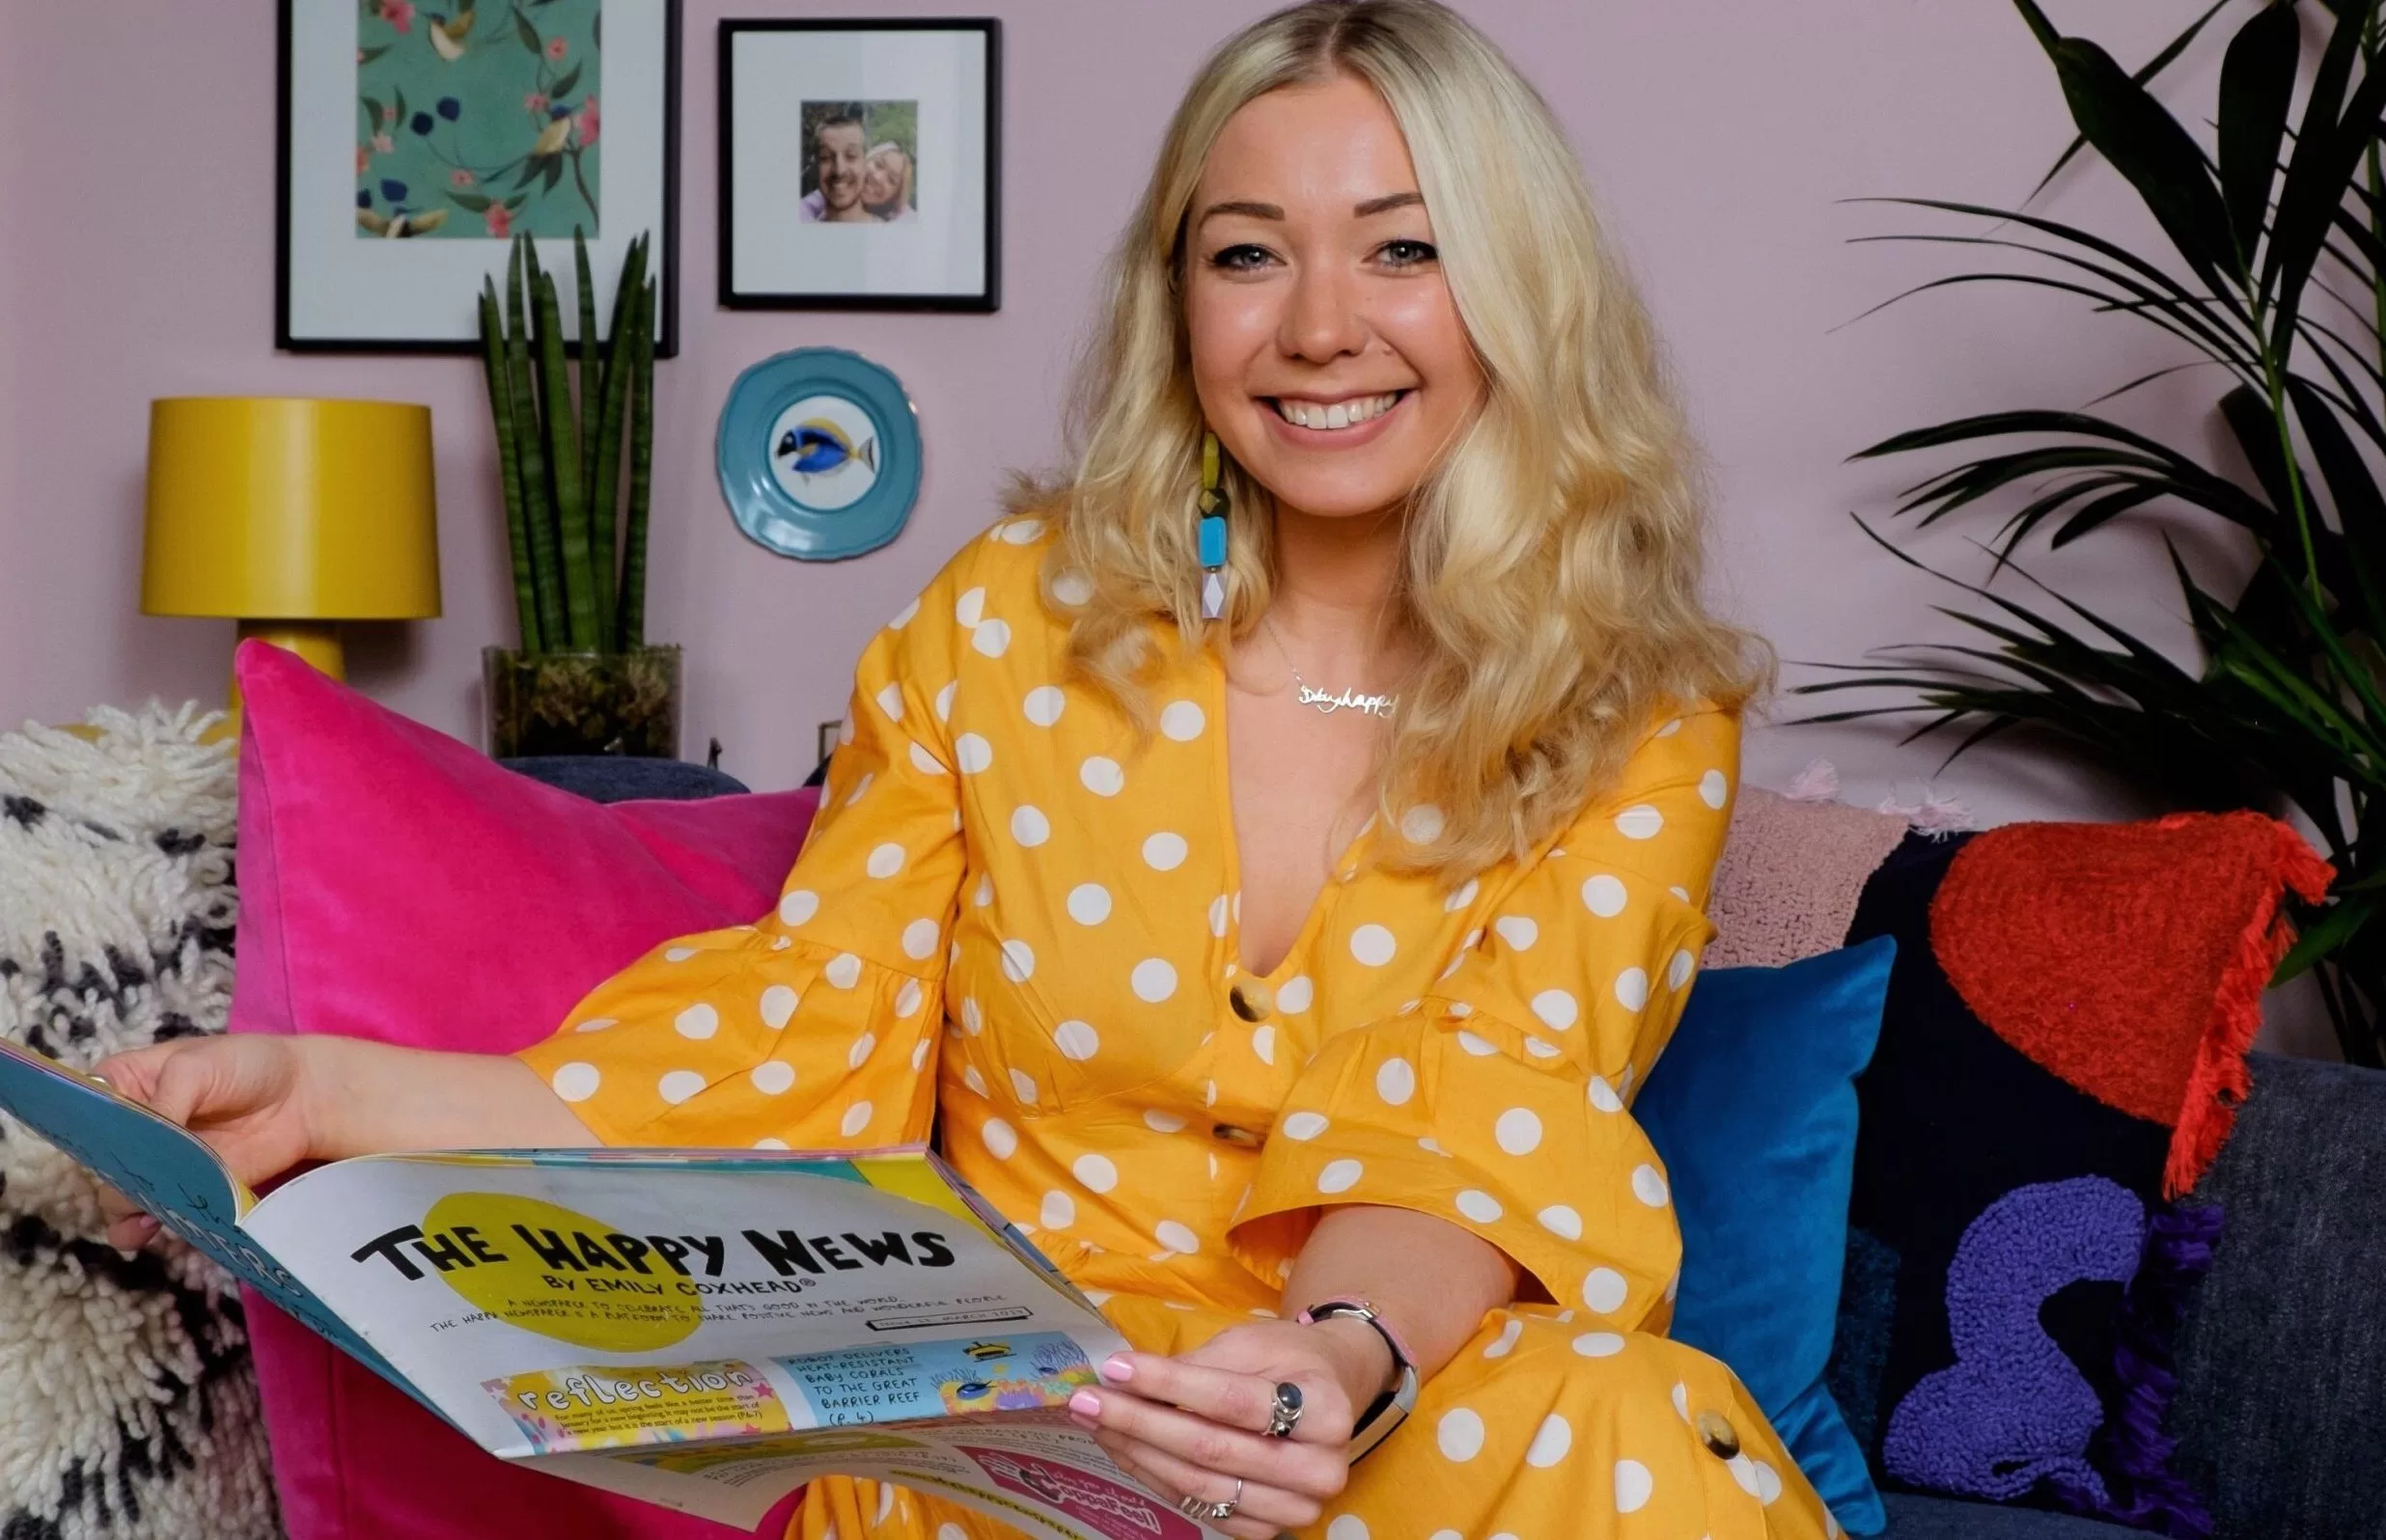 Emily Coxhead, founder of The Happy News, wearing a yellow dress 